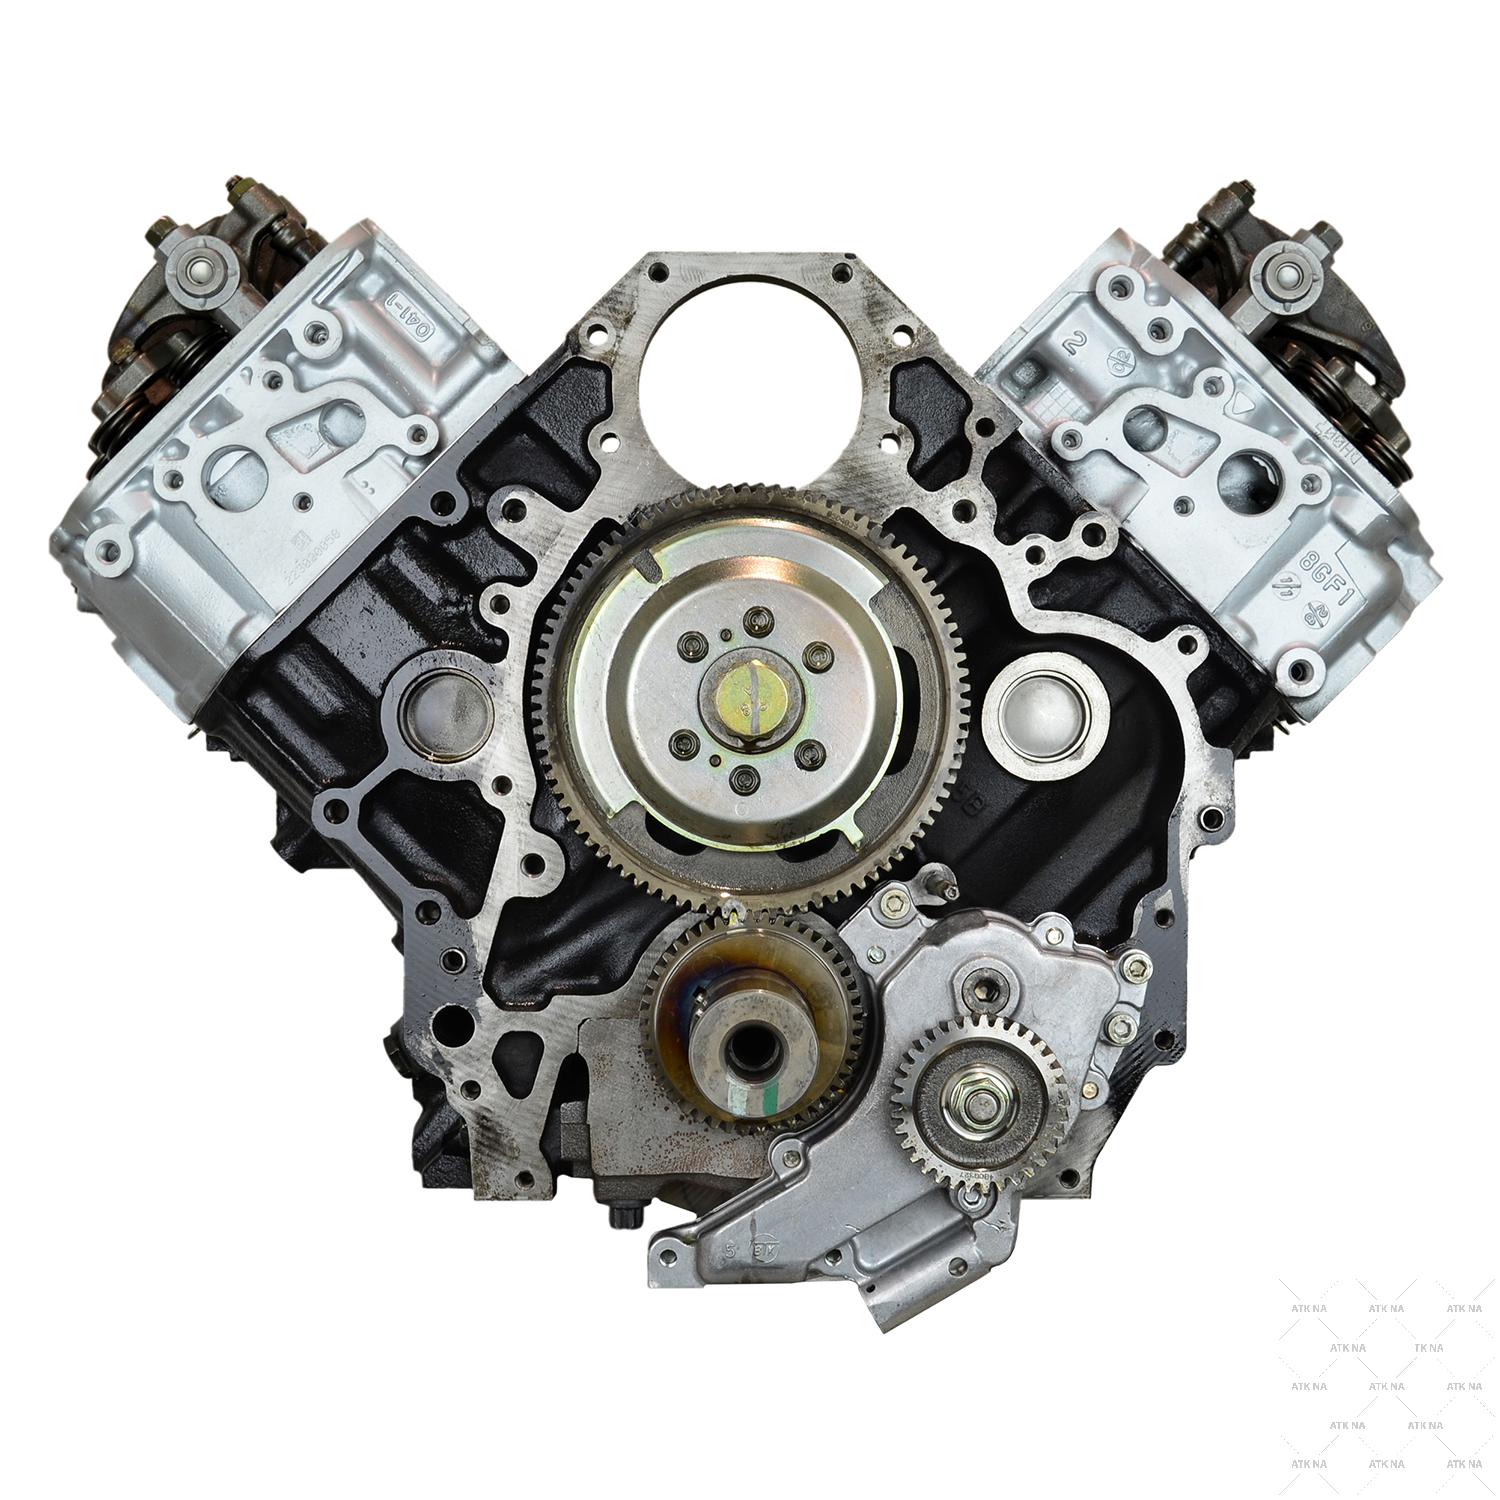 DCFN Remanufactured Crate Engine for 2001-2004 Chevy Silverado/GMC Sierra 2500HD/3500HD with V8 6.6L Duramax Turbo Diesel LB7]